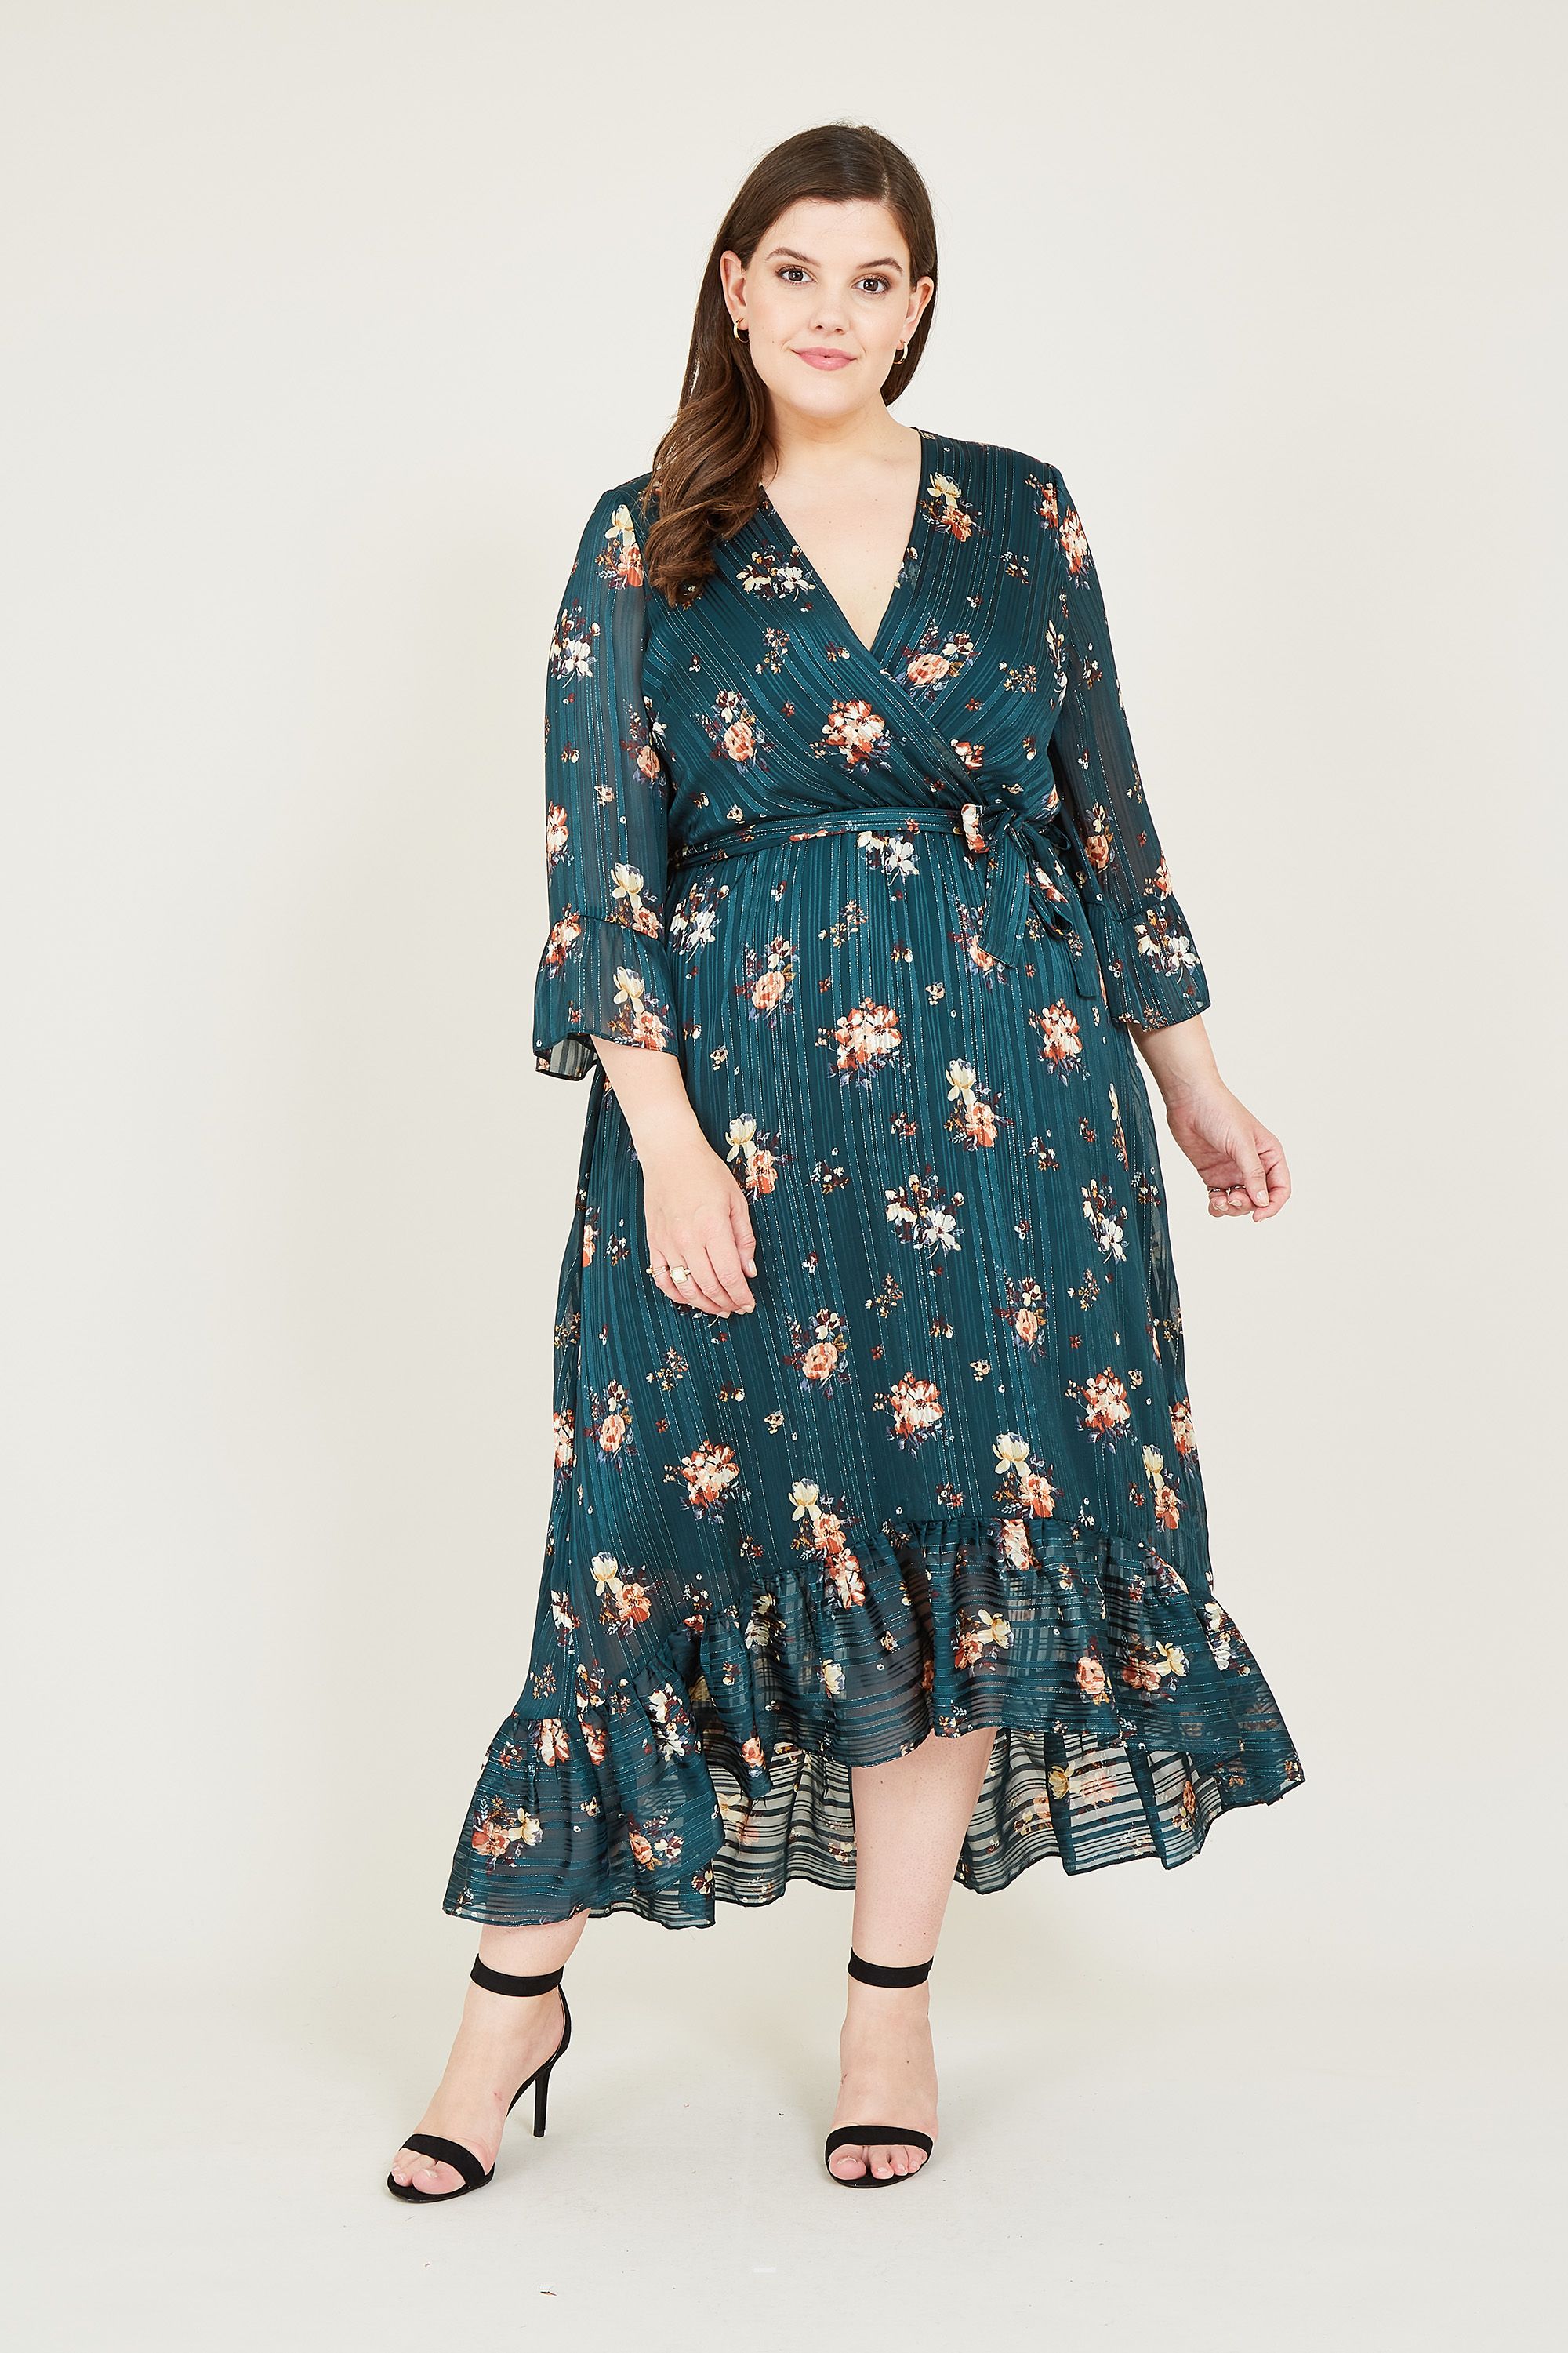 Fancy a new fancy dress? Opt for our Plus Size Floral Lurex Midi Dress. Featuring a plush asymmetric hemline and long sleeves for balance, this party dress is crafted from luxurious lurex. The pretty floral print adds an eye-catching twist, complemented by the framing nape button and tie waist. Look good from every angle when you pair with heels.